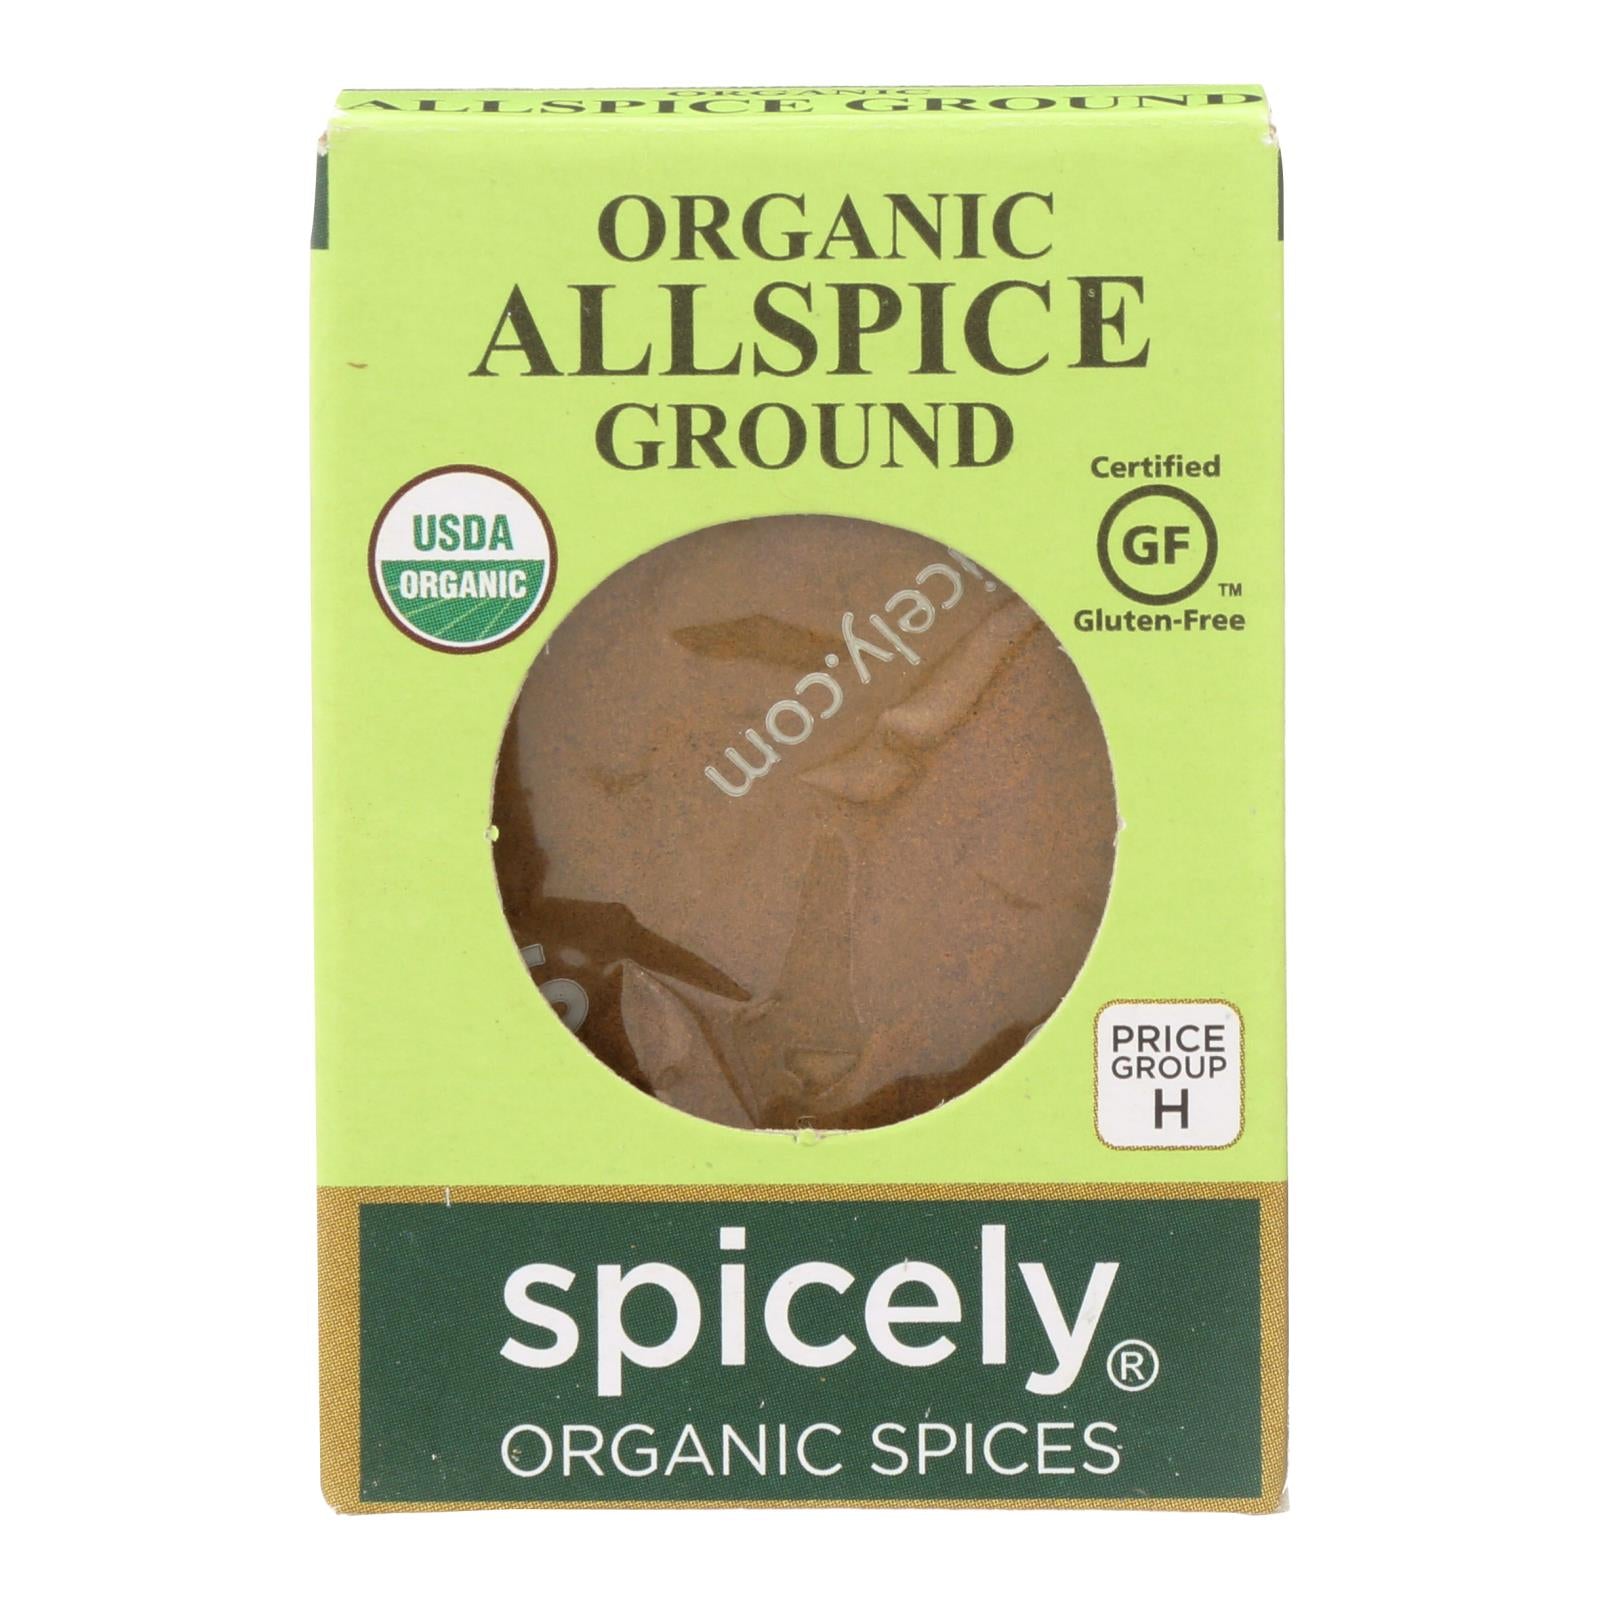 Spicely Organics - Organic Allspice - Ground - Case Of 6 - 0.45 Oz. - Whole Green Foods